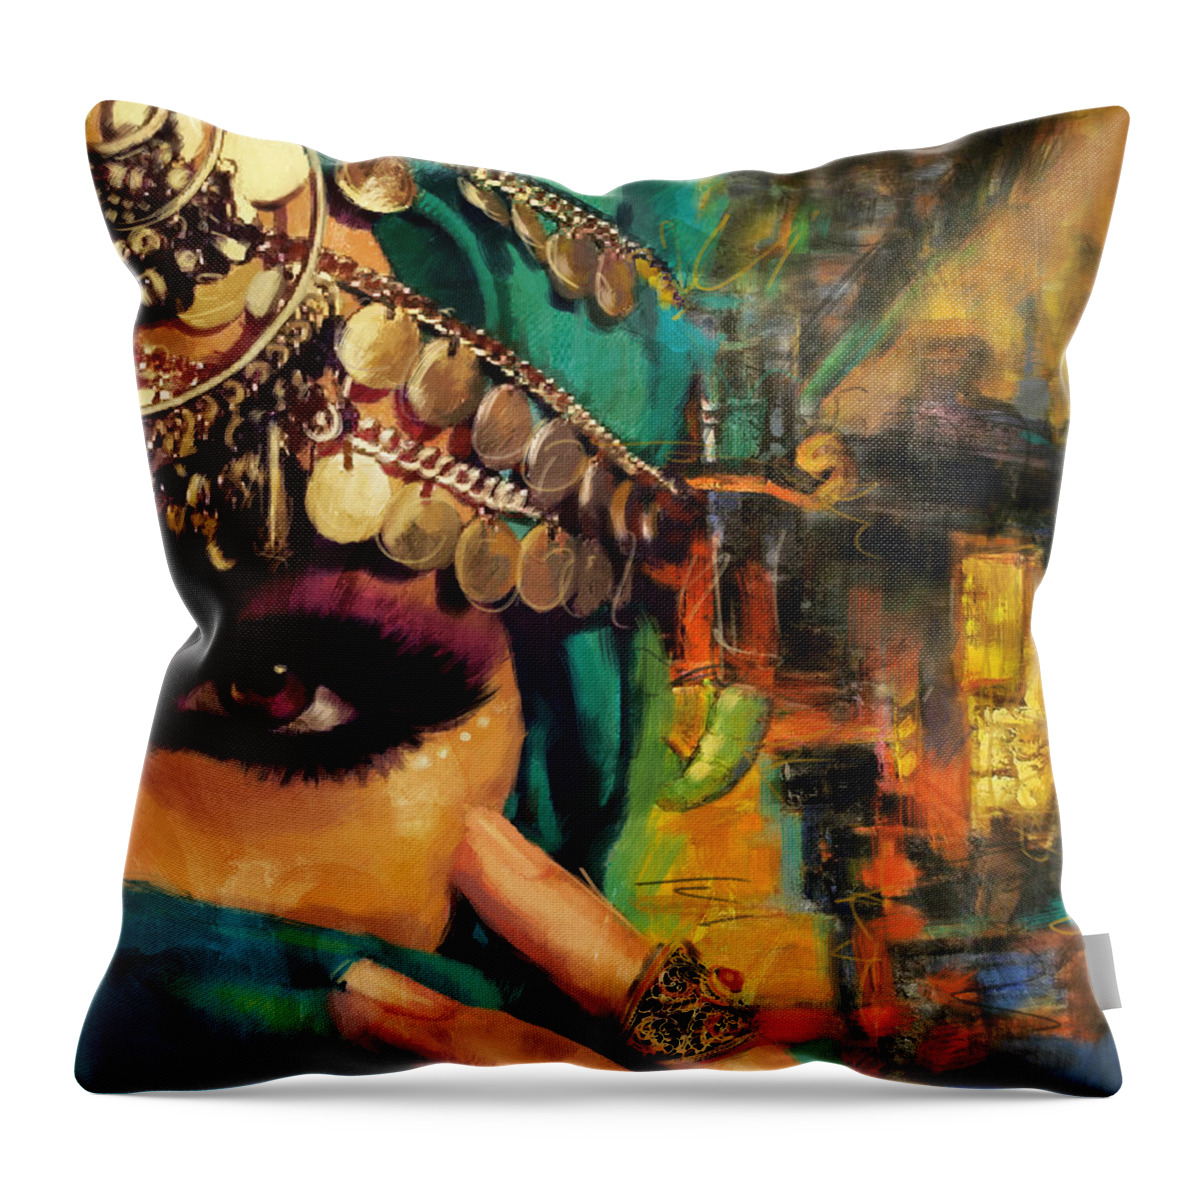 Female Throw Pillow featuring the painting Mystery by Corporate Art Task Force